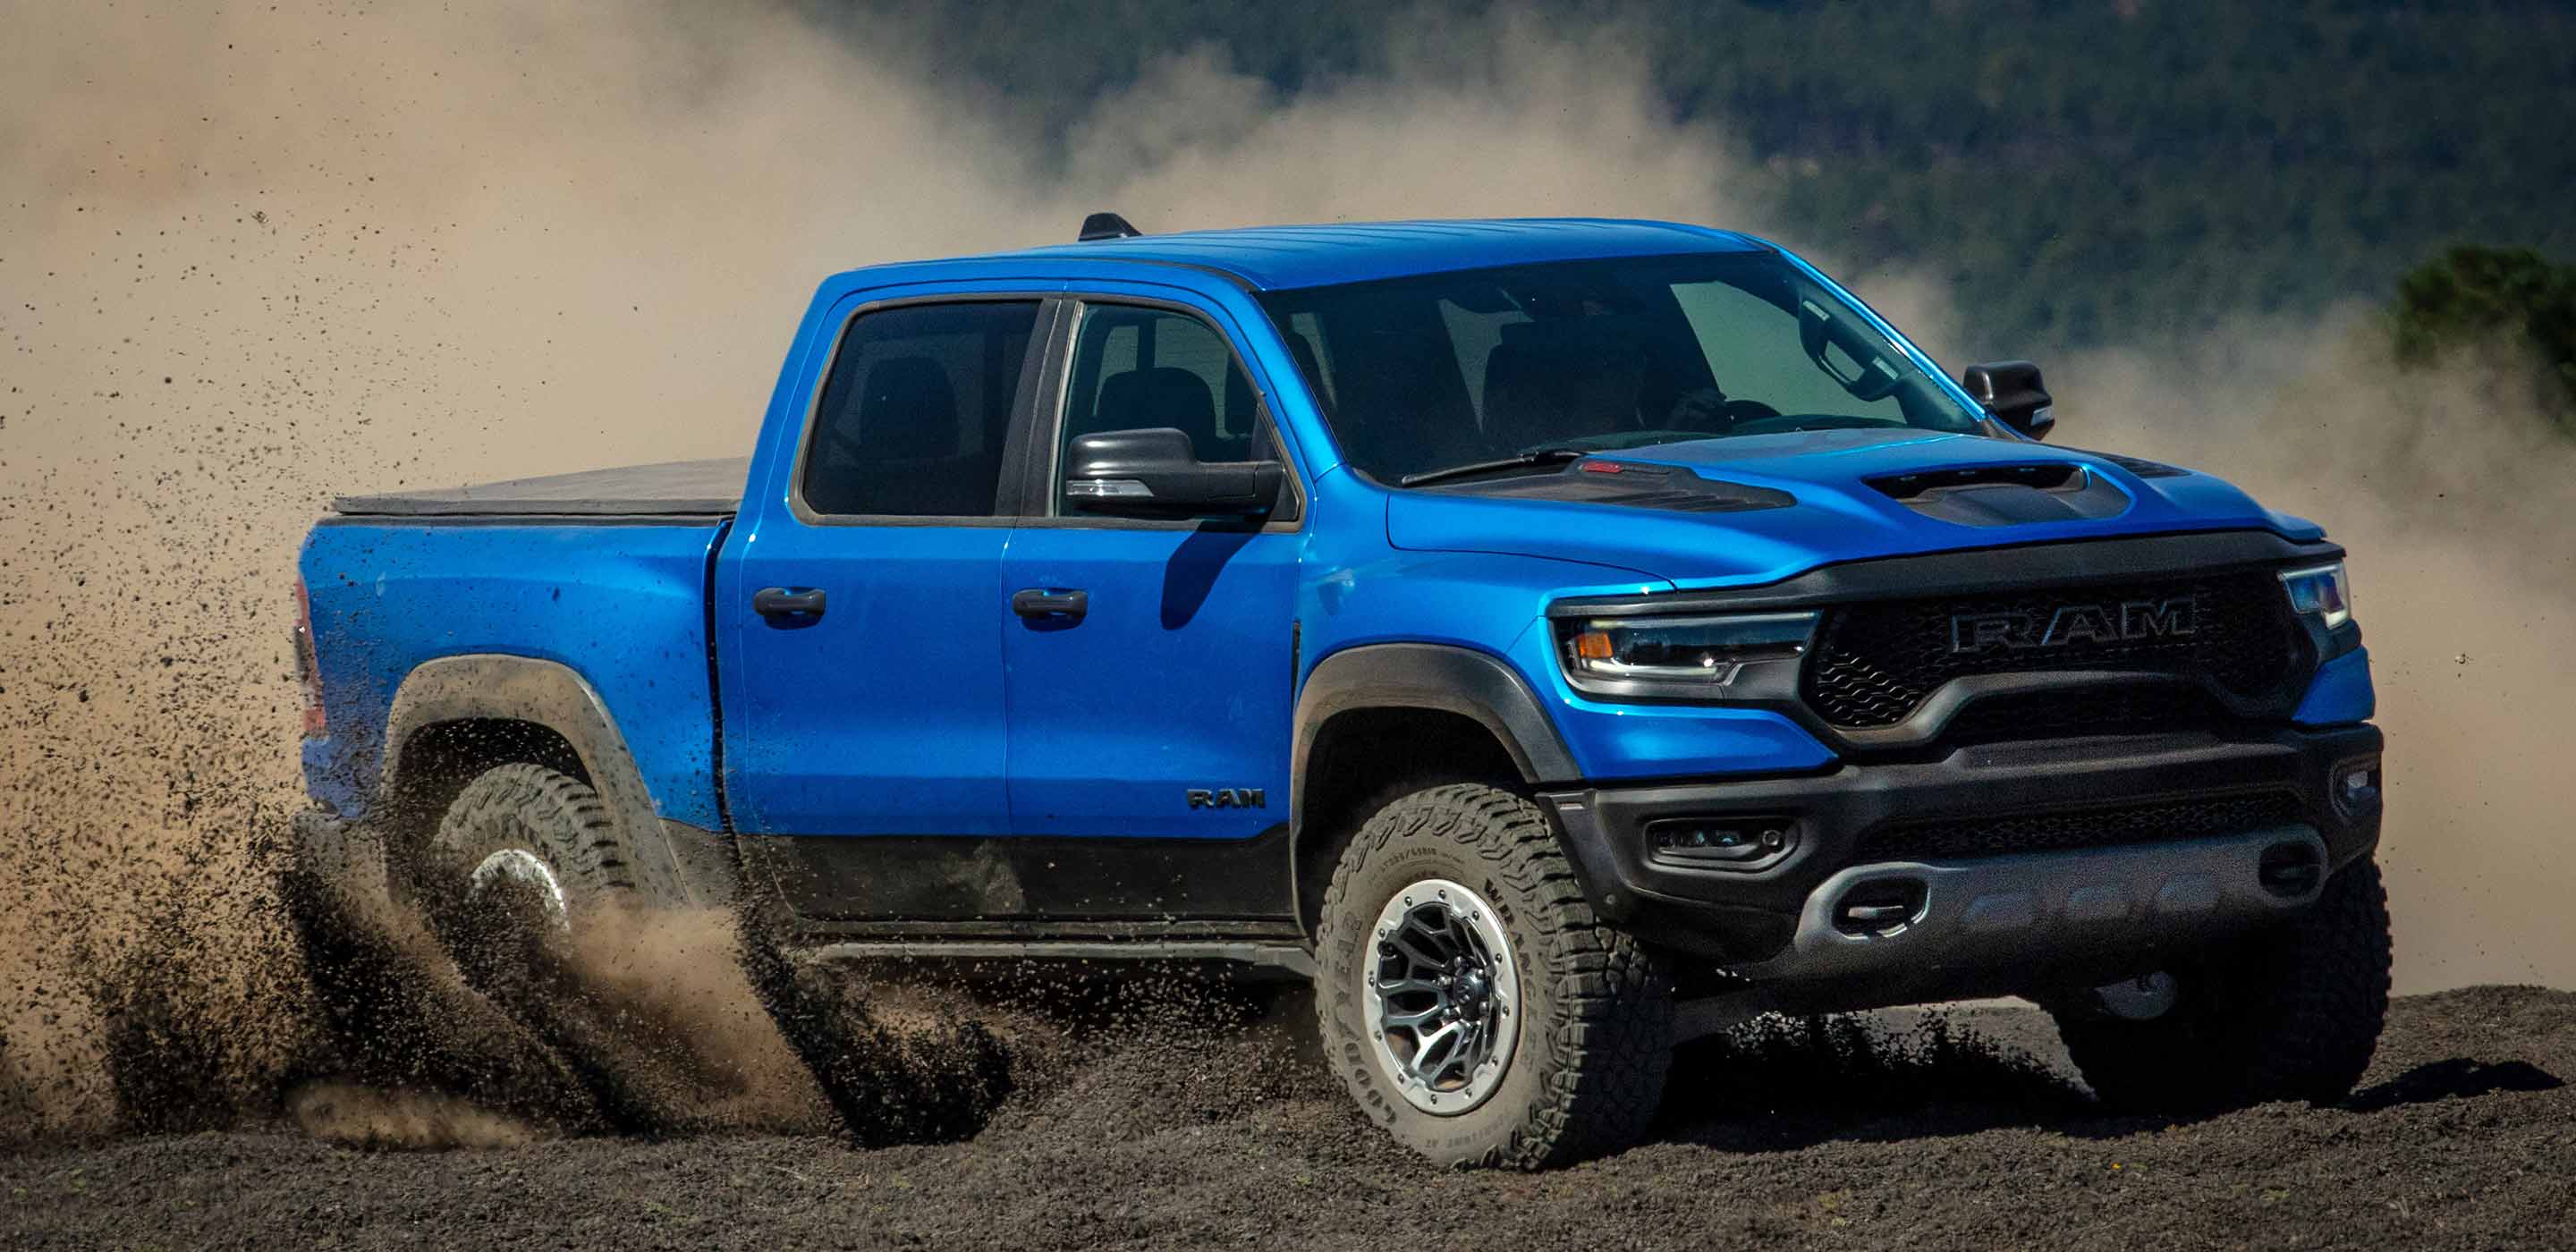 Display The 2023 Ram1500 TRX being driven off-road on a dirt trail, with a cloud of dust coming from its rear wheels.